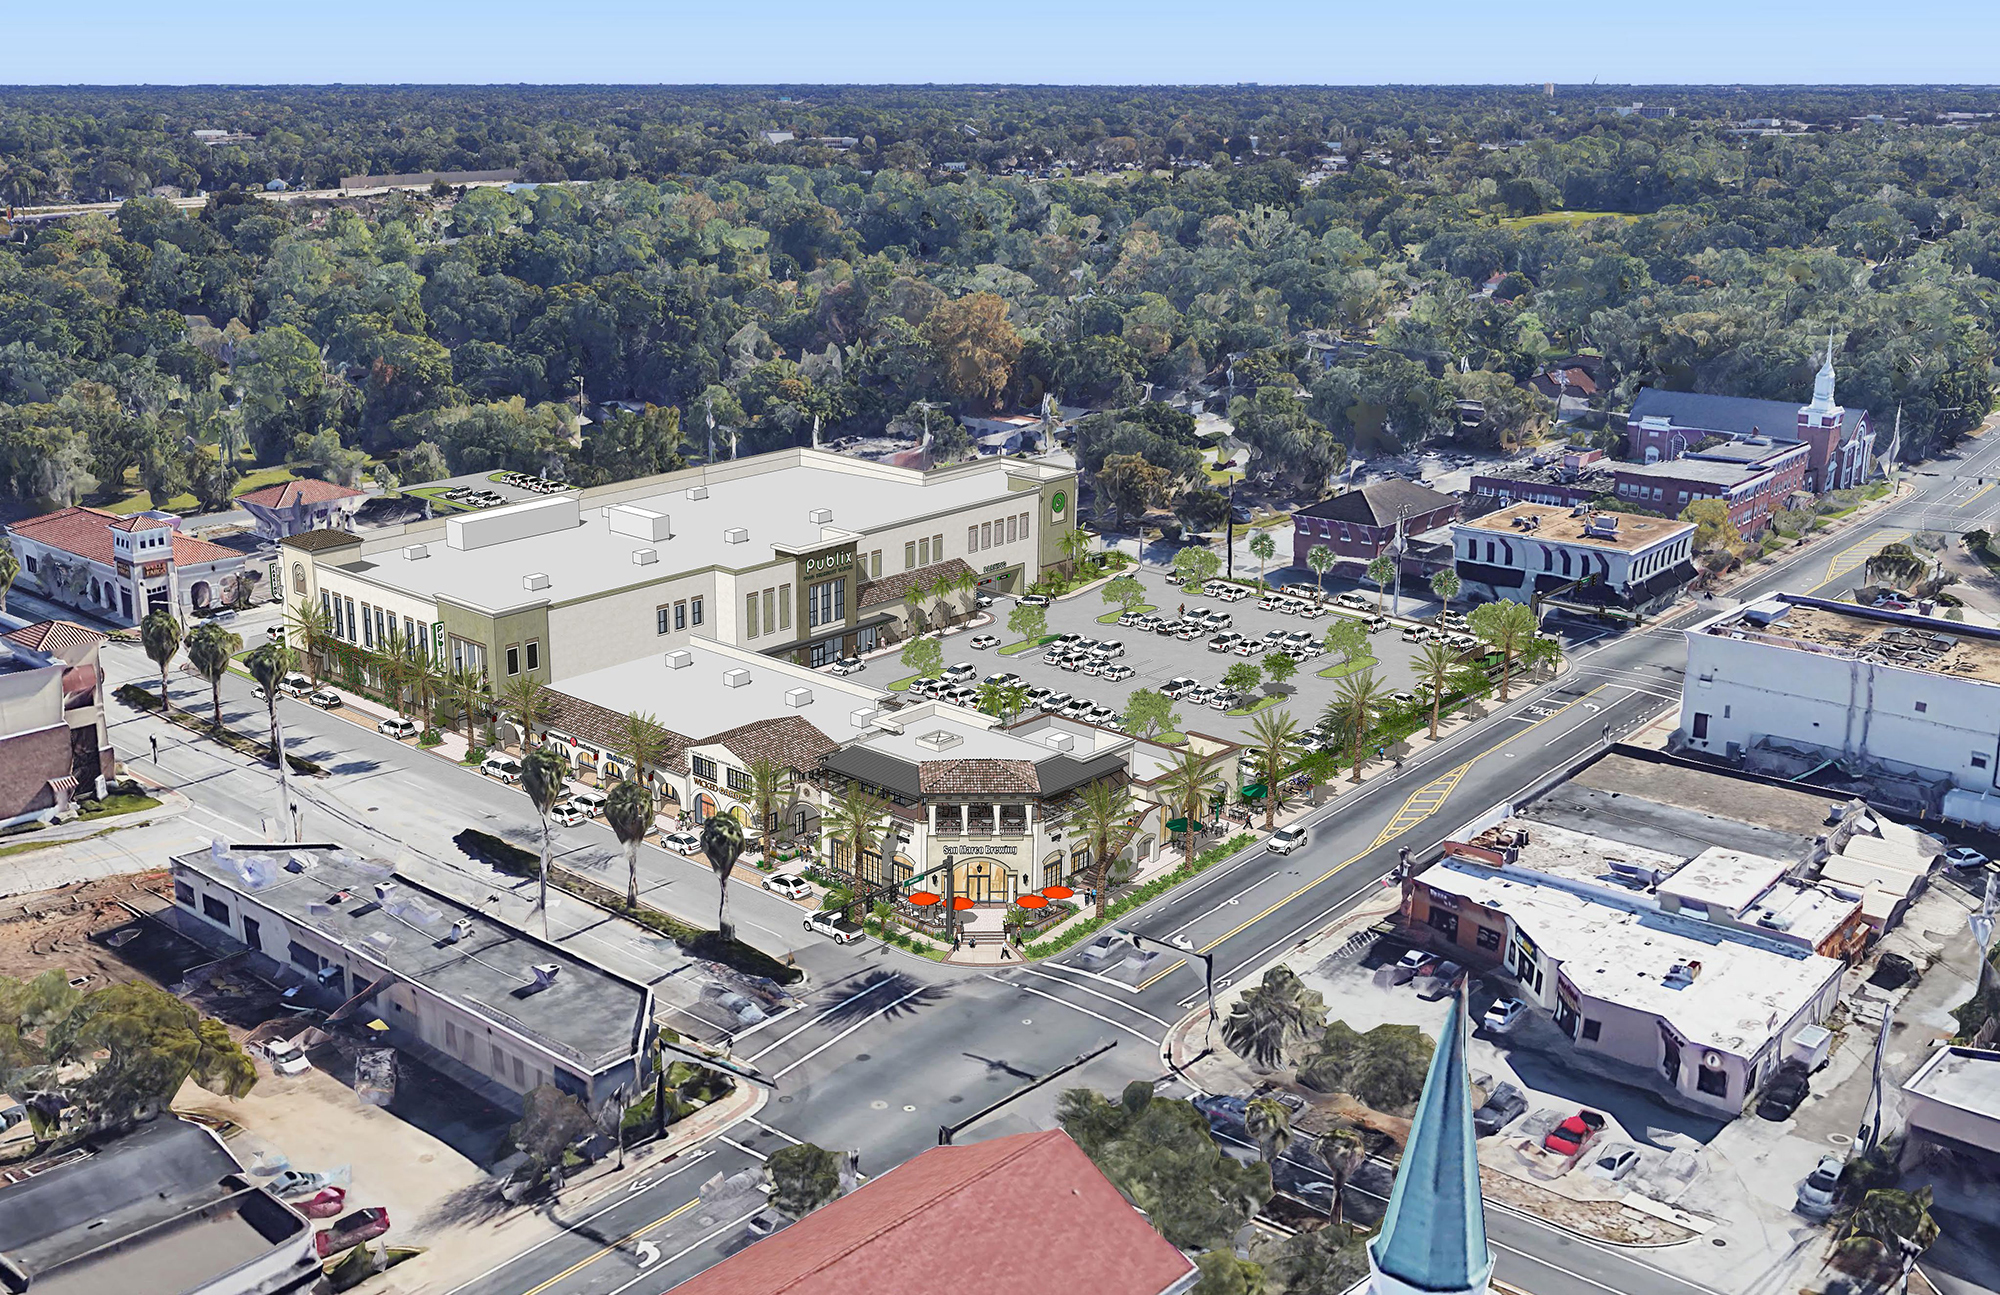 The final rendering of the East San Marco development.